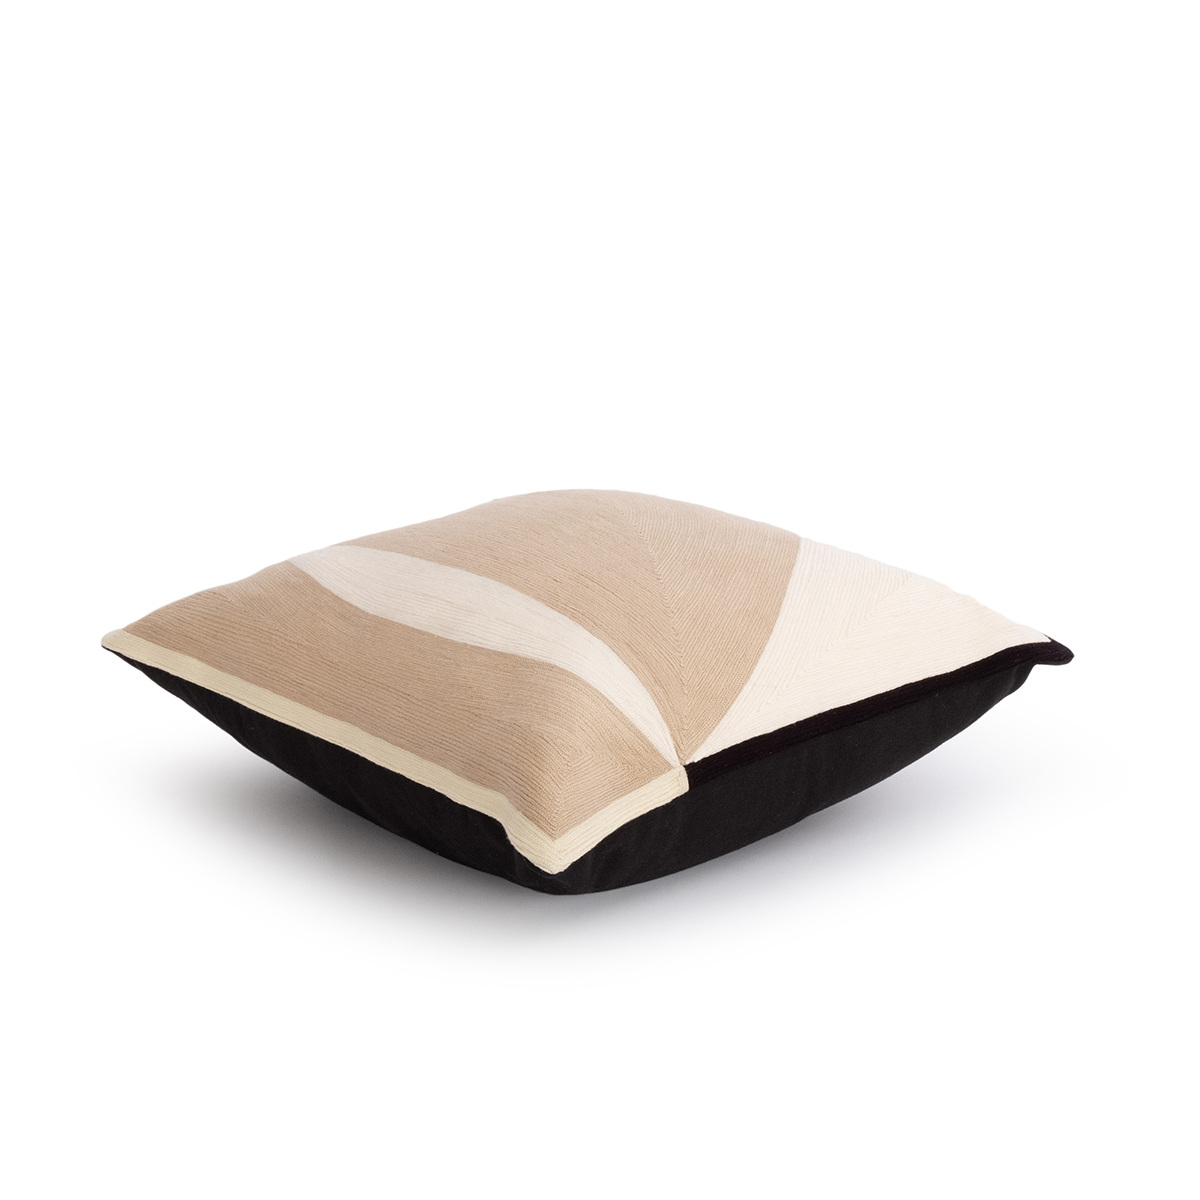 Cushion Abstract, Nude - 42 x 42 cm - 100% cotton - image 2